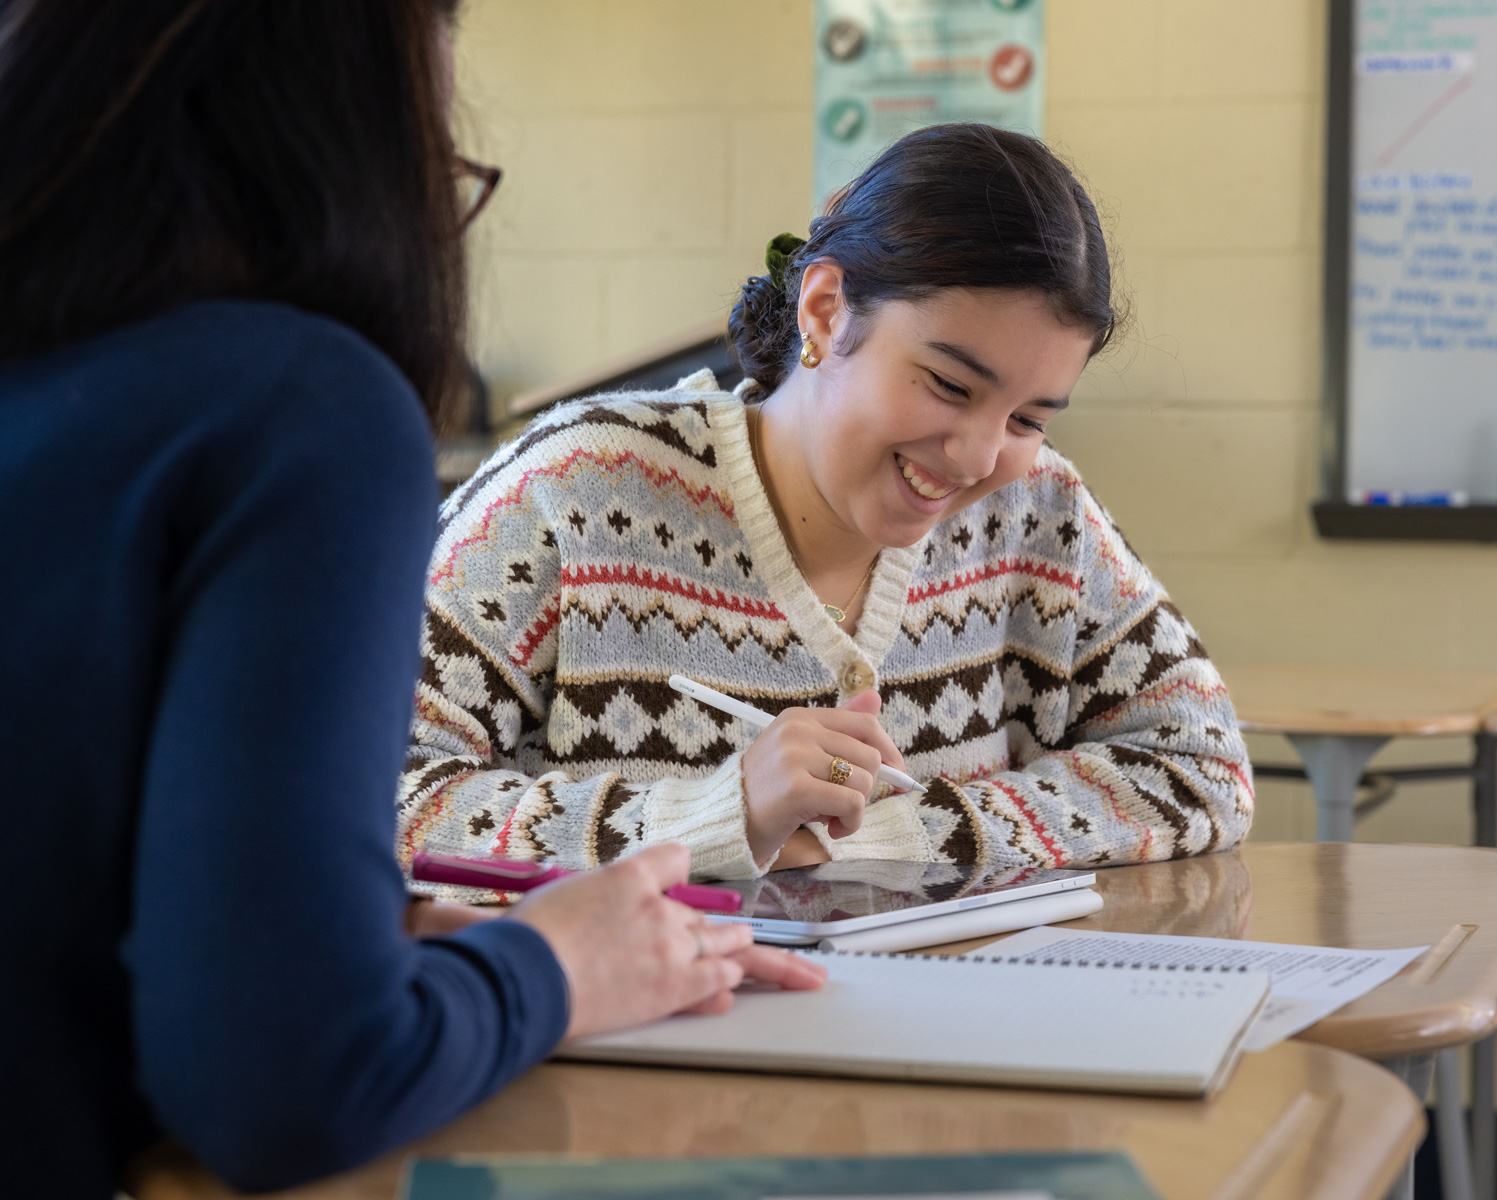 Student sitting at a desk next to a teacher while holding an Apple pencil and looking at an iPad